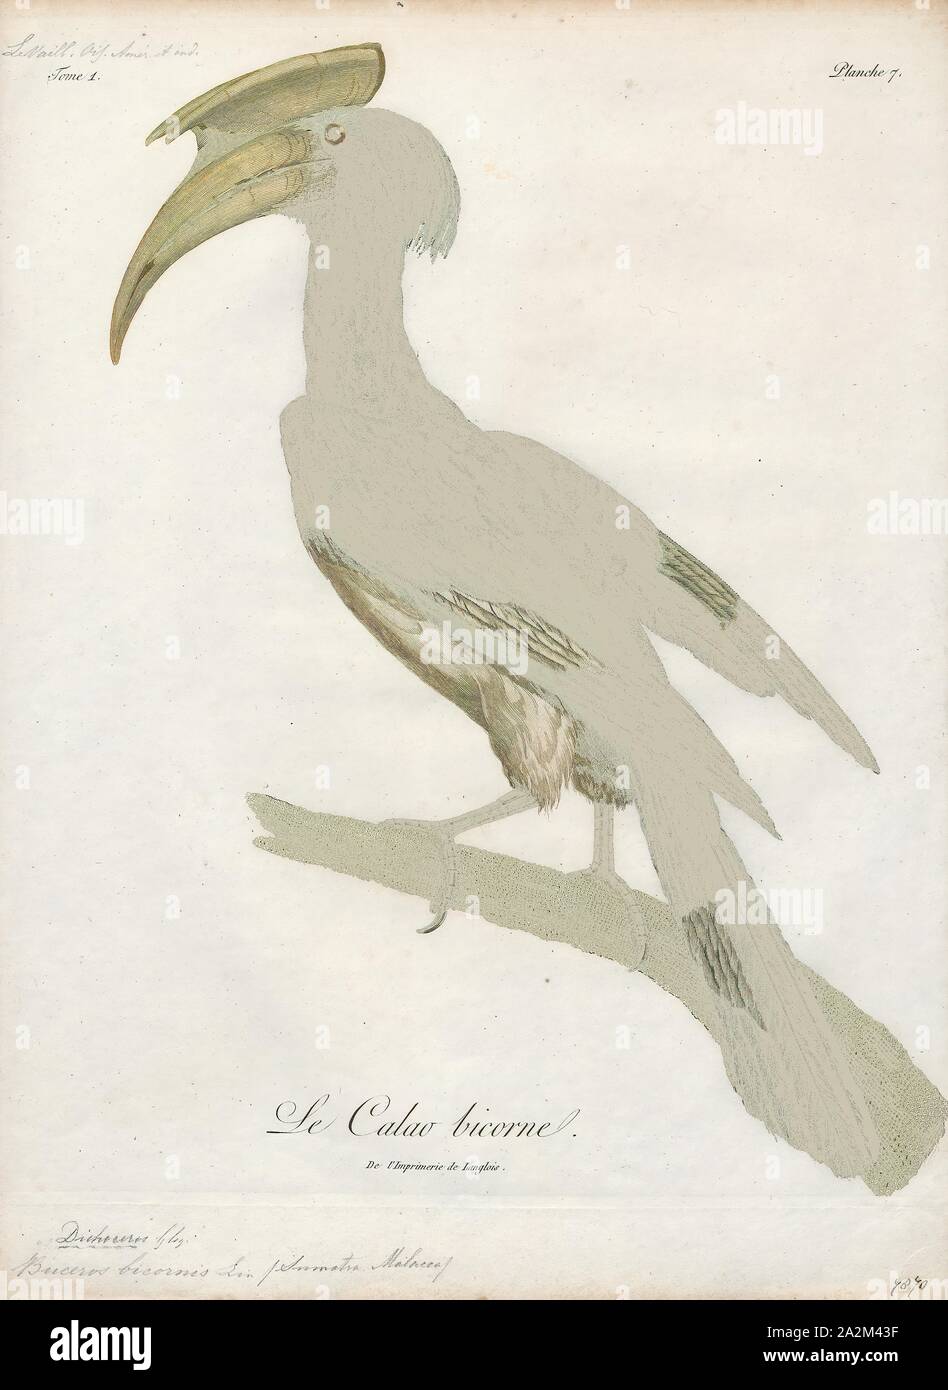 Buceros bicornis, Print, The great hornbill (Buceros bicornis) also known as the great Indian hornbill or great pied hornbill, is one of the larger members of the hornbill family. It is found in the Indian subcontinent and Southeast Asia. Its impressive size and colour have made it important in many tribal cultures and rituals. The great hornbill is long-lived, living for nearly 50 years in captivity. It is predominantly frugivorous, but is an opportunist and will prey on small mammals, reptiles and birds., 1801 Stock Photo